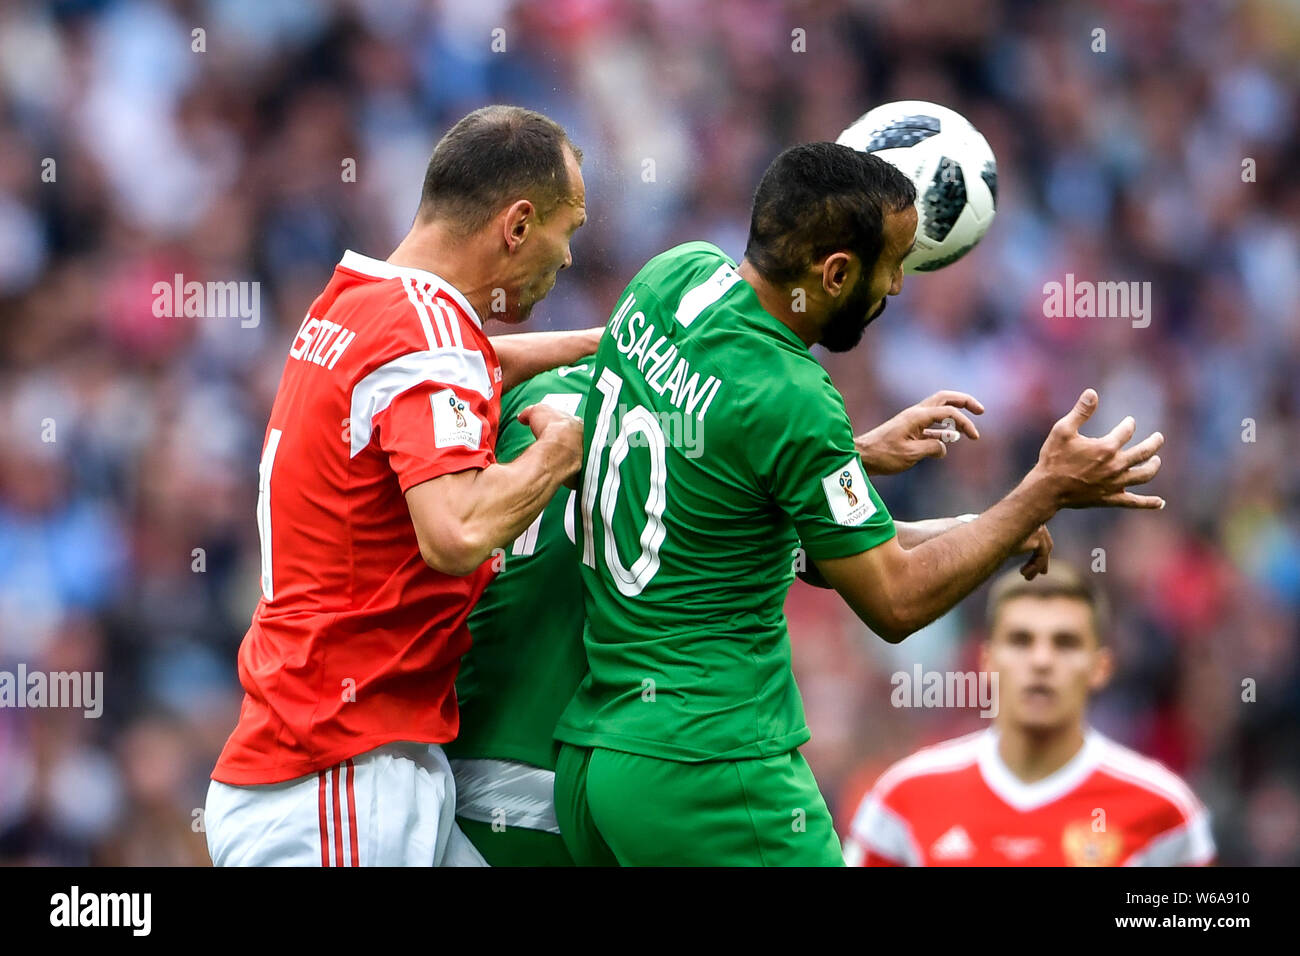 Sergei Ignashevich of Russia, left, challenges Mohammad Al-Sahlawi of Saudi Arabia in their Group A match during the 2018 FIFA World Cup in Moscow, Ru Stock Photo